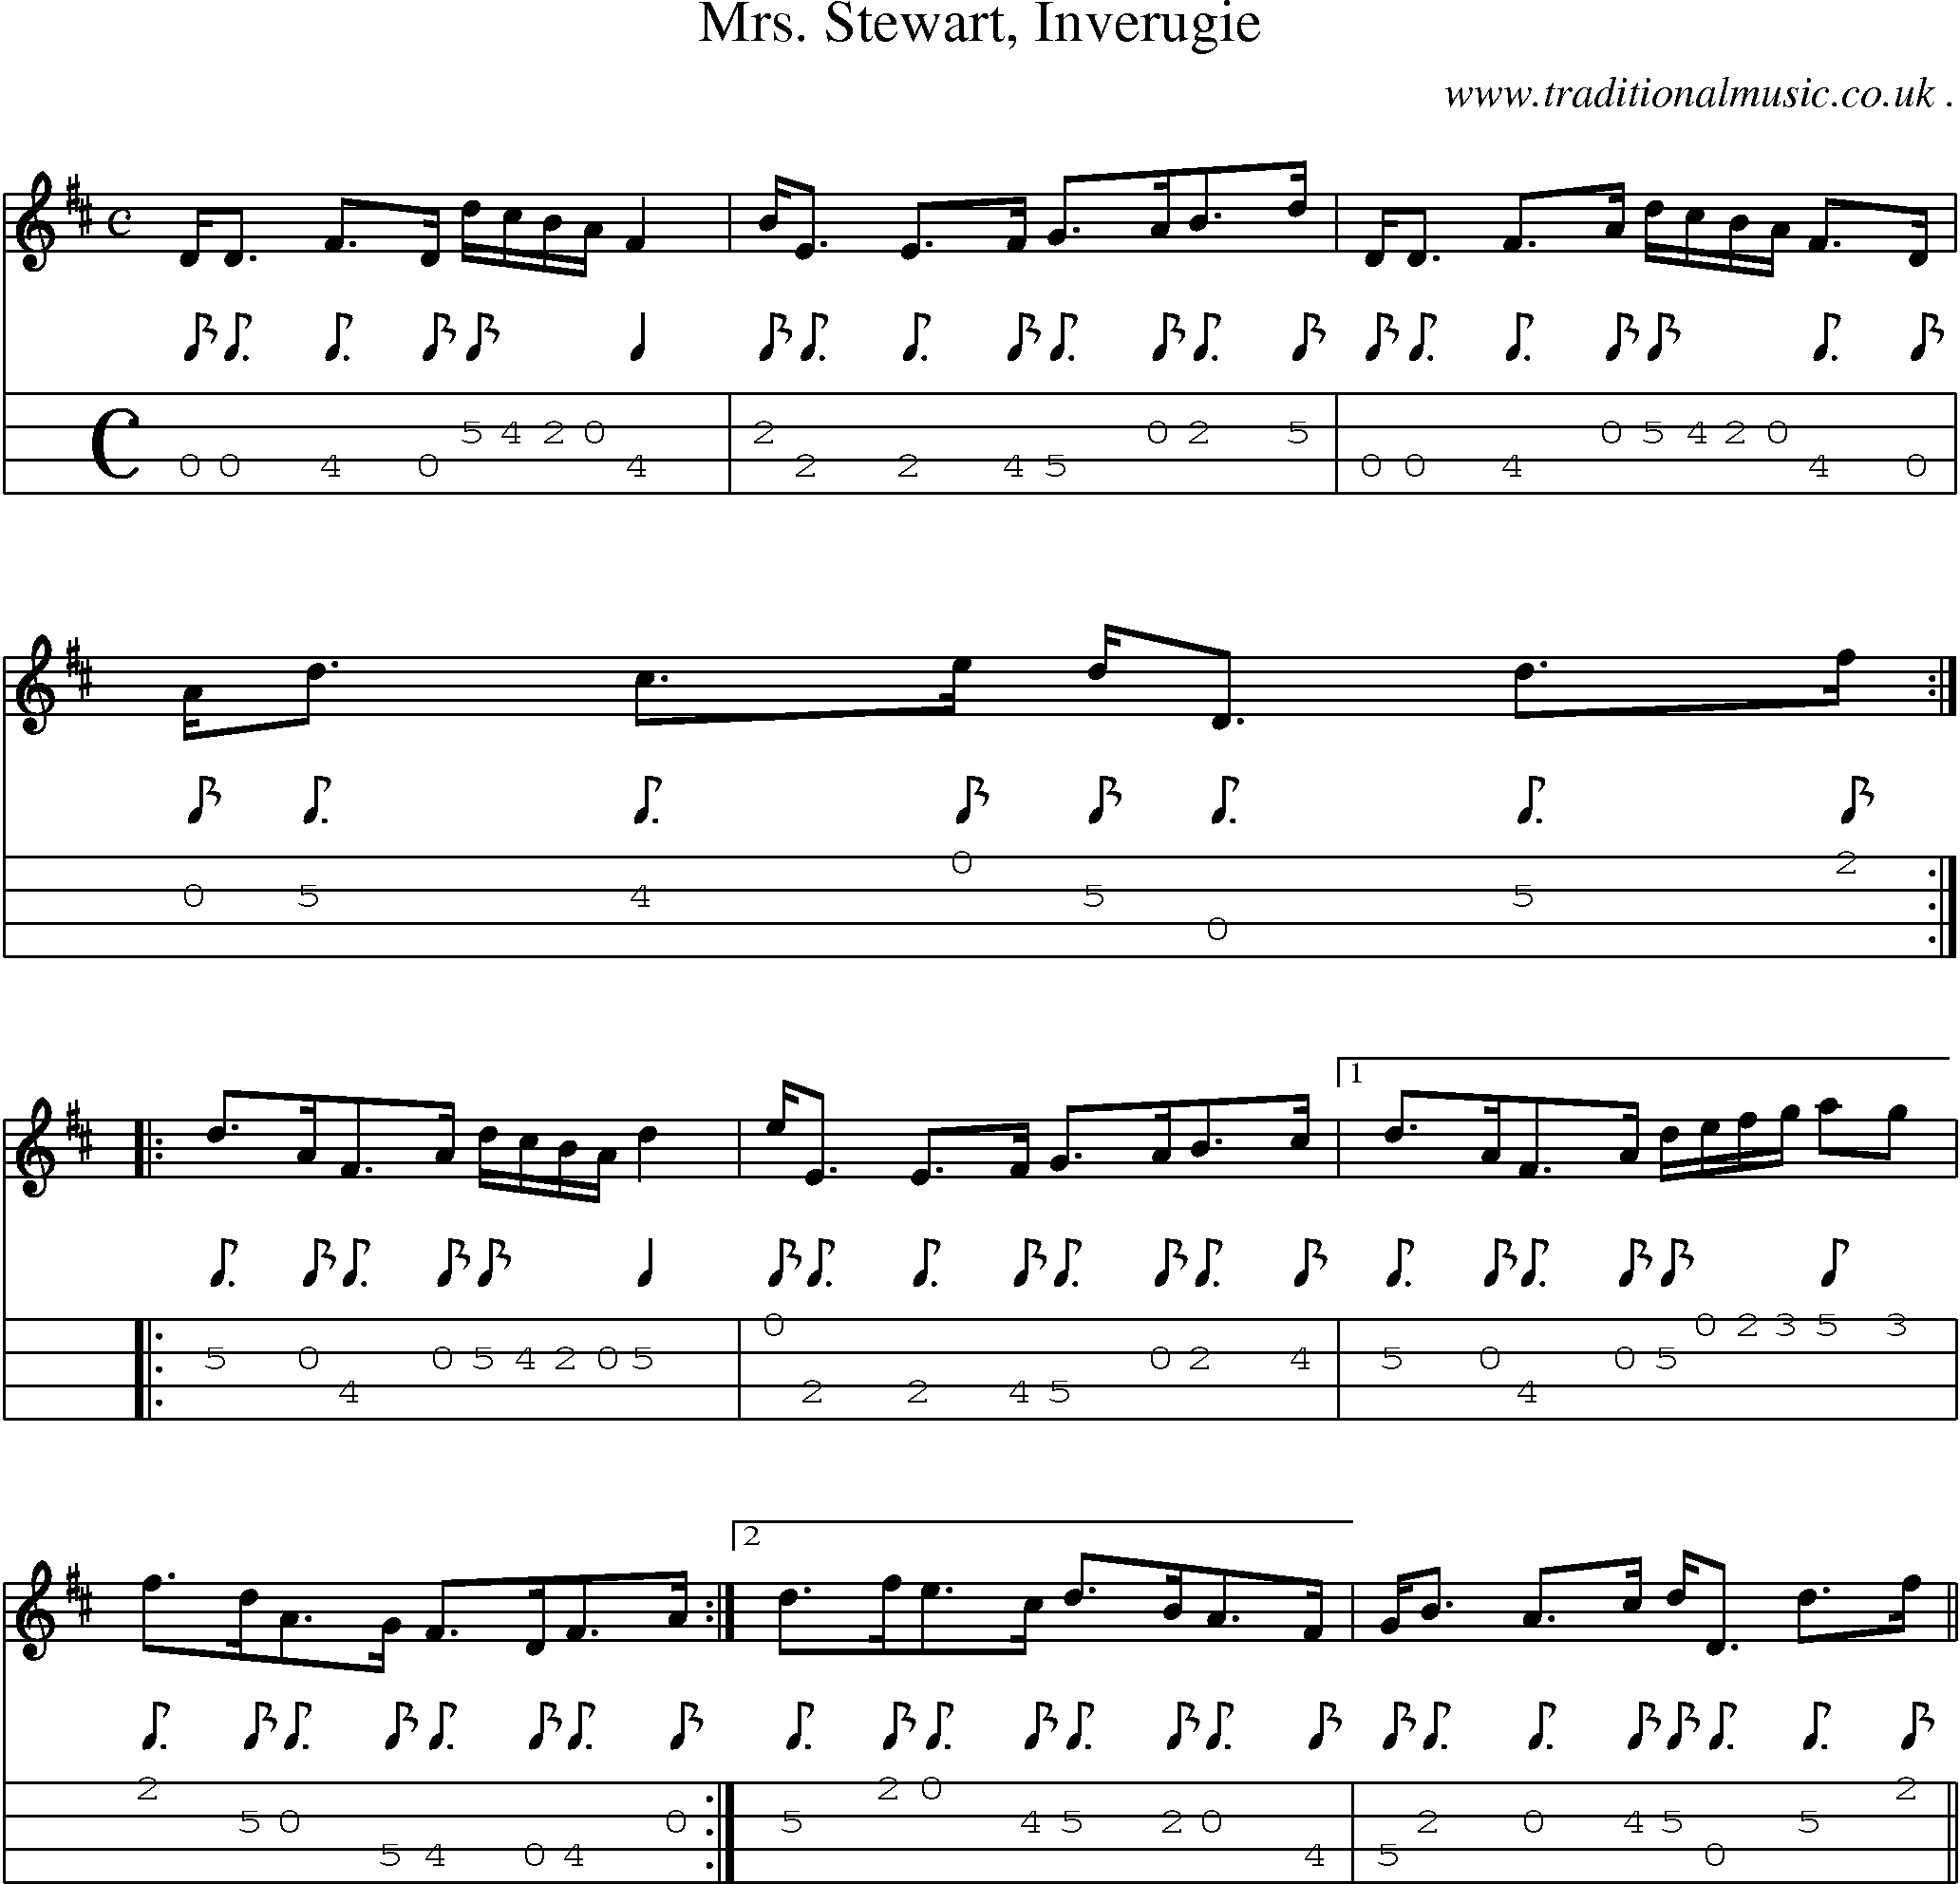 Sheet-music  score, Chords and Mandolin Tabs for Mrs Stewart Inverugie